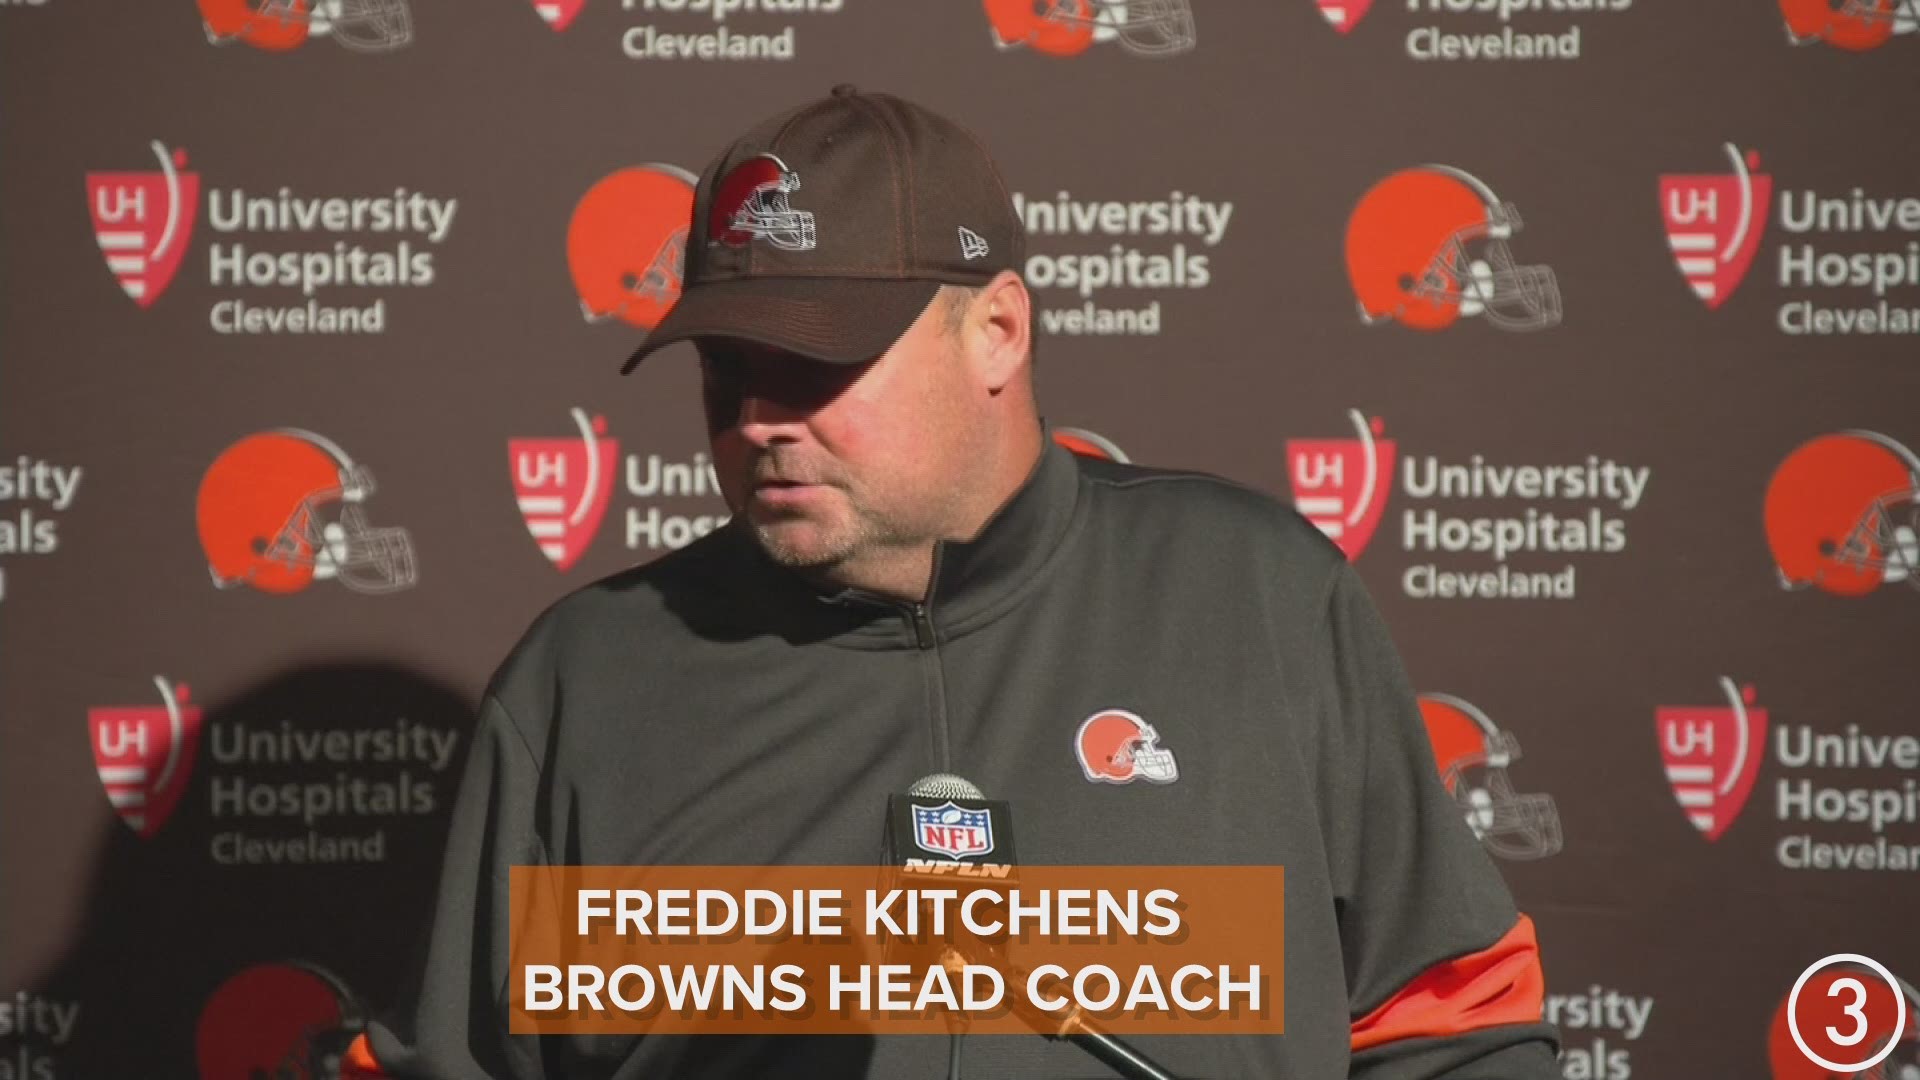 Taking heat!  Social media took aim at Cleveland Browns head coach Freddie Kitchens following a strange fourth down sequence vs. the New England Patriots on Sunday.